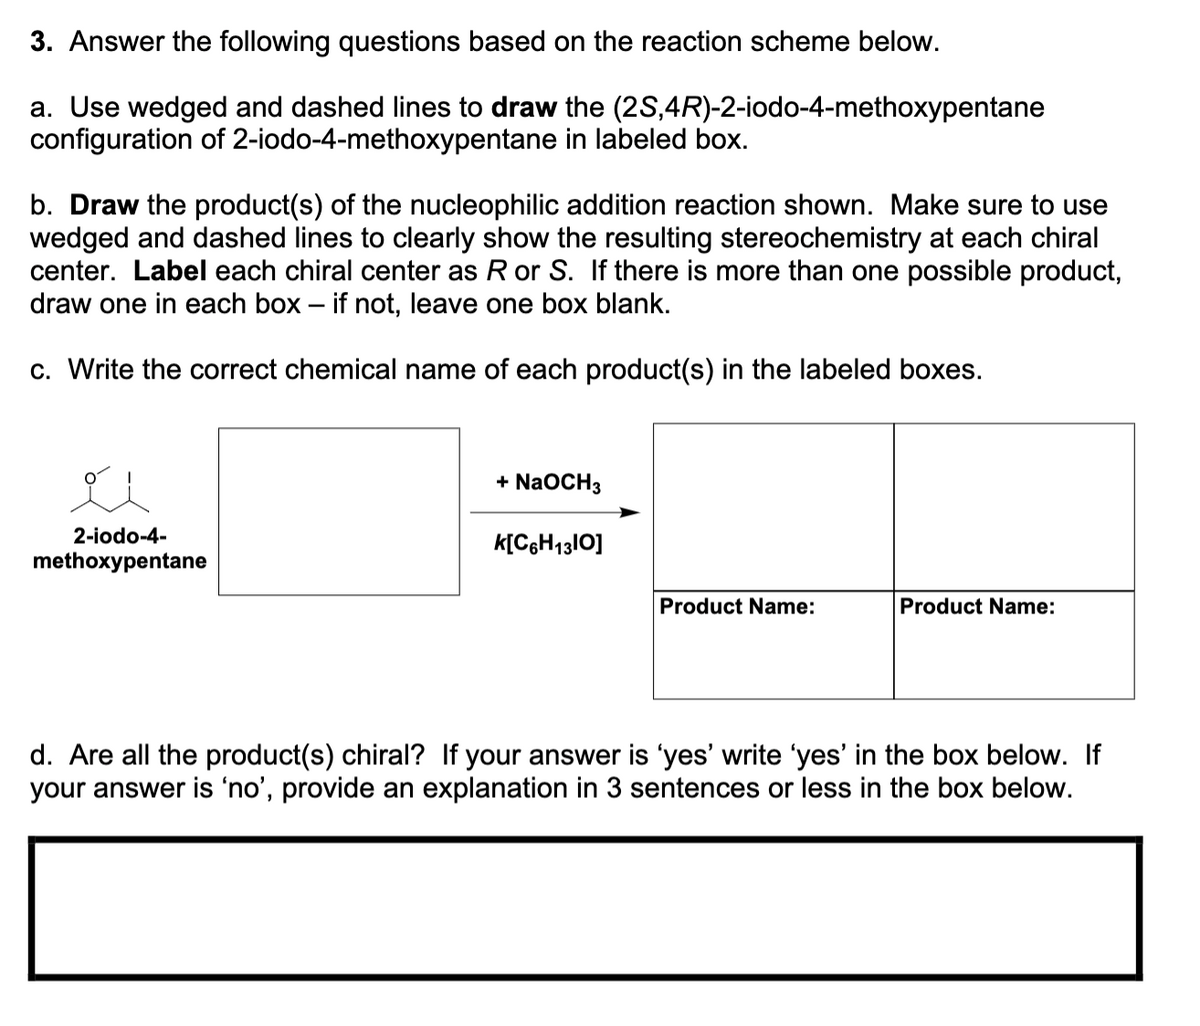 3. Answer the following questions based on the reaction scheme below.
a. Use wedged and dashed lines to draw the (2S,4R)-2-iodo-4-methoxypentane
configuration of 2-iodo-4-methoxypentane in labeled box.
b. Draw the product(s) of the nucleophilic addition reaction shown. Make sure to use
wedged and dashed lines to clearly show the resulting stereochemistry at each chiral
center. Label each chiral center as R or S. If there is more than one possible product,
draw one in each box - if not, leave one box blank.
c. Write the correct chemical name of each product(s) in the labeled boxes.
2-iodo-4-
methoxypentane
+ NaOCH 3
K[C6H1310]
Product Name:
Product Name:
d. Are all the product(s) chiral? If your answer is 'yes' write 'yes' in the box below. If
your answer is 'no', provide an explanation in 3 sentences or less in the box below.